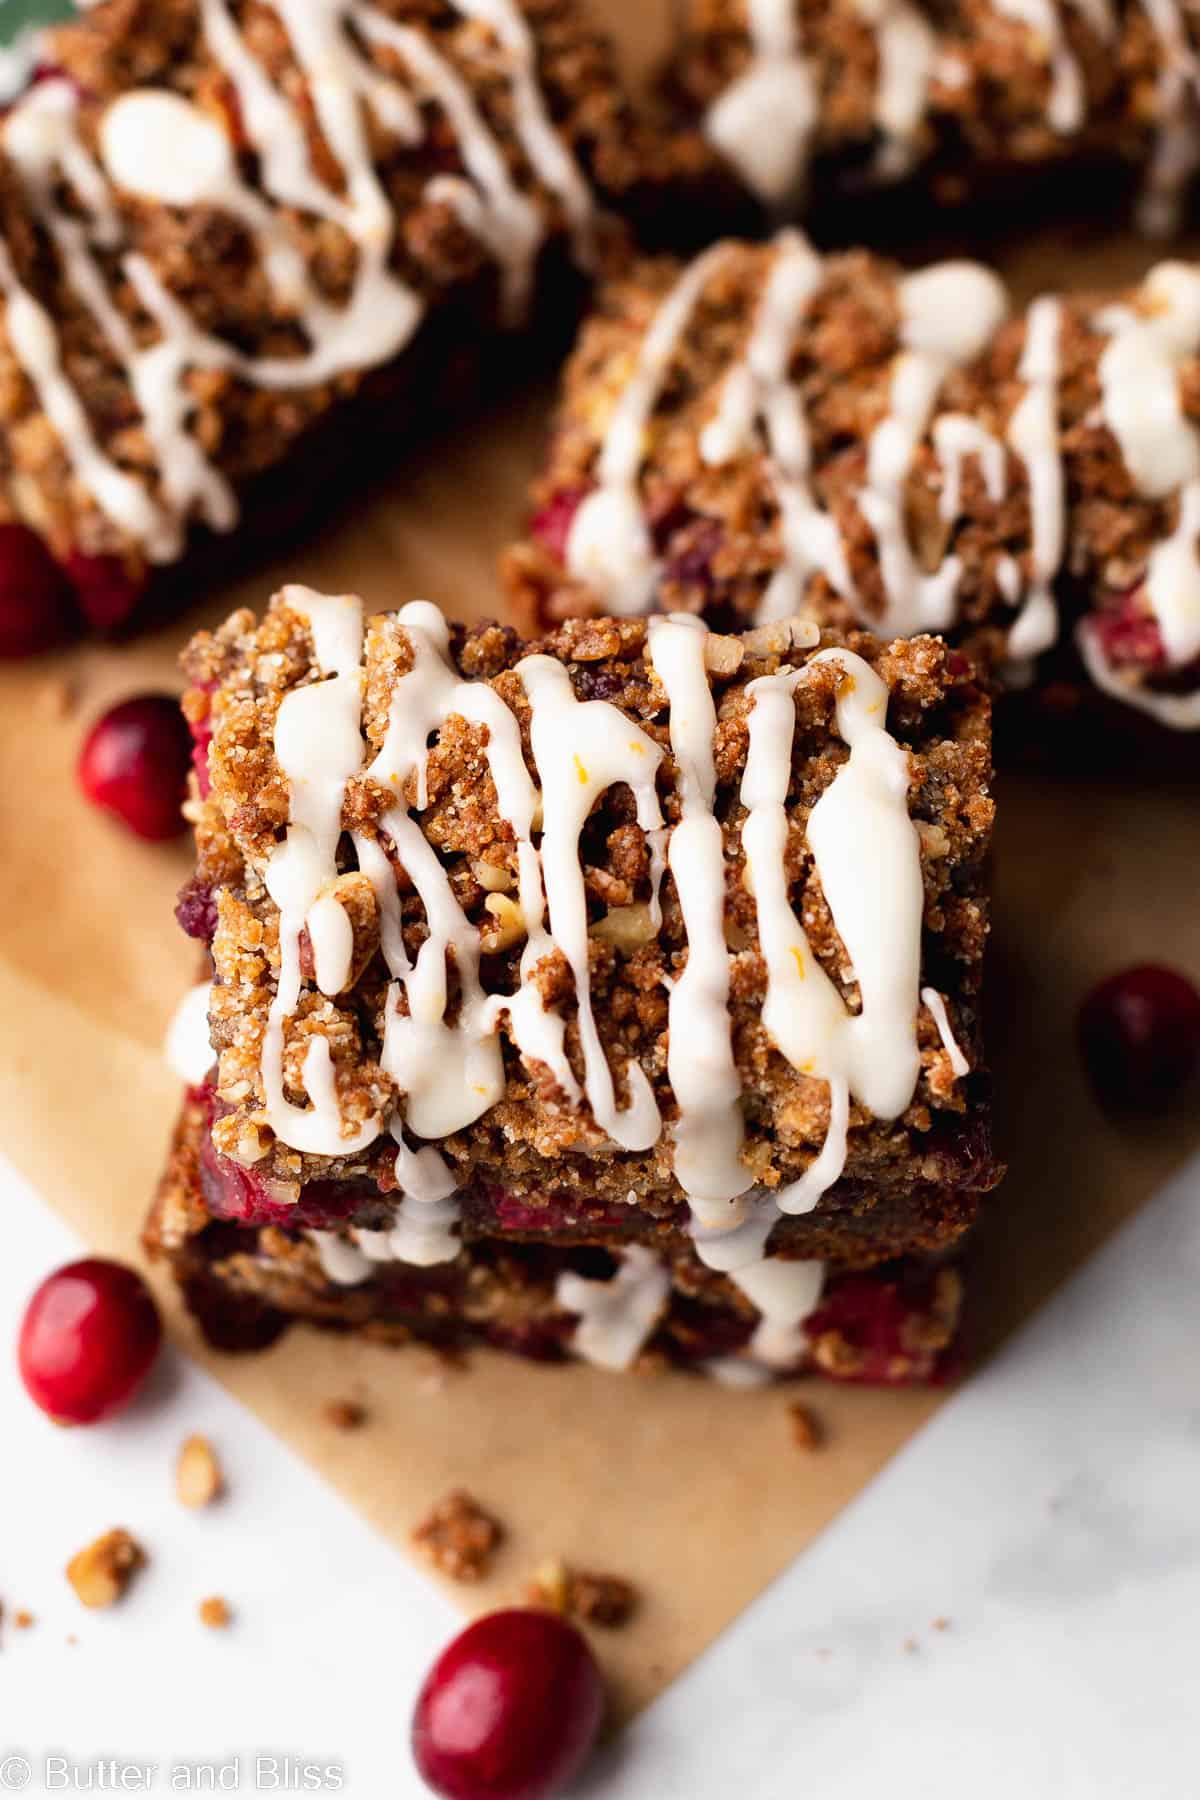 Gluten free gingerbread cranberry bars with orange icing arrange on a table.